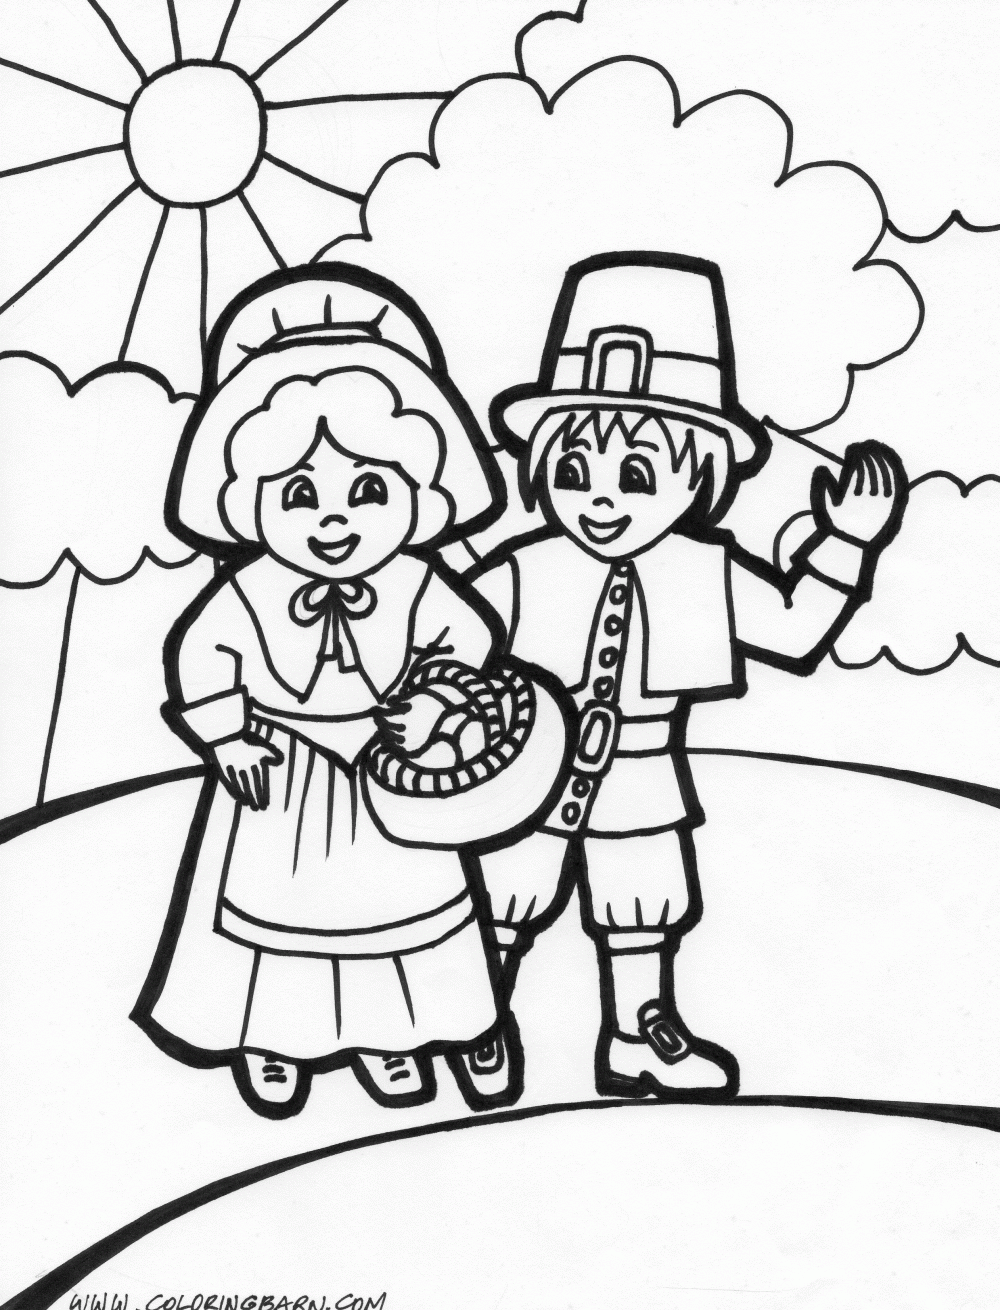 Thanksgiving Pilgrim Coloring Pages >> Disney Coloring Pages